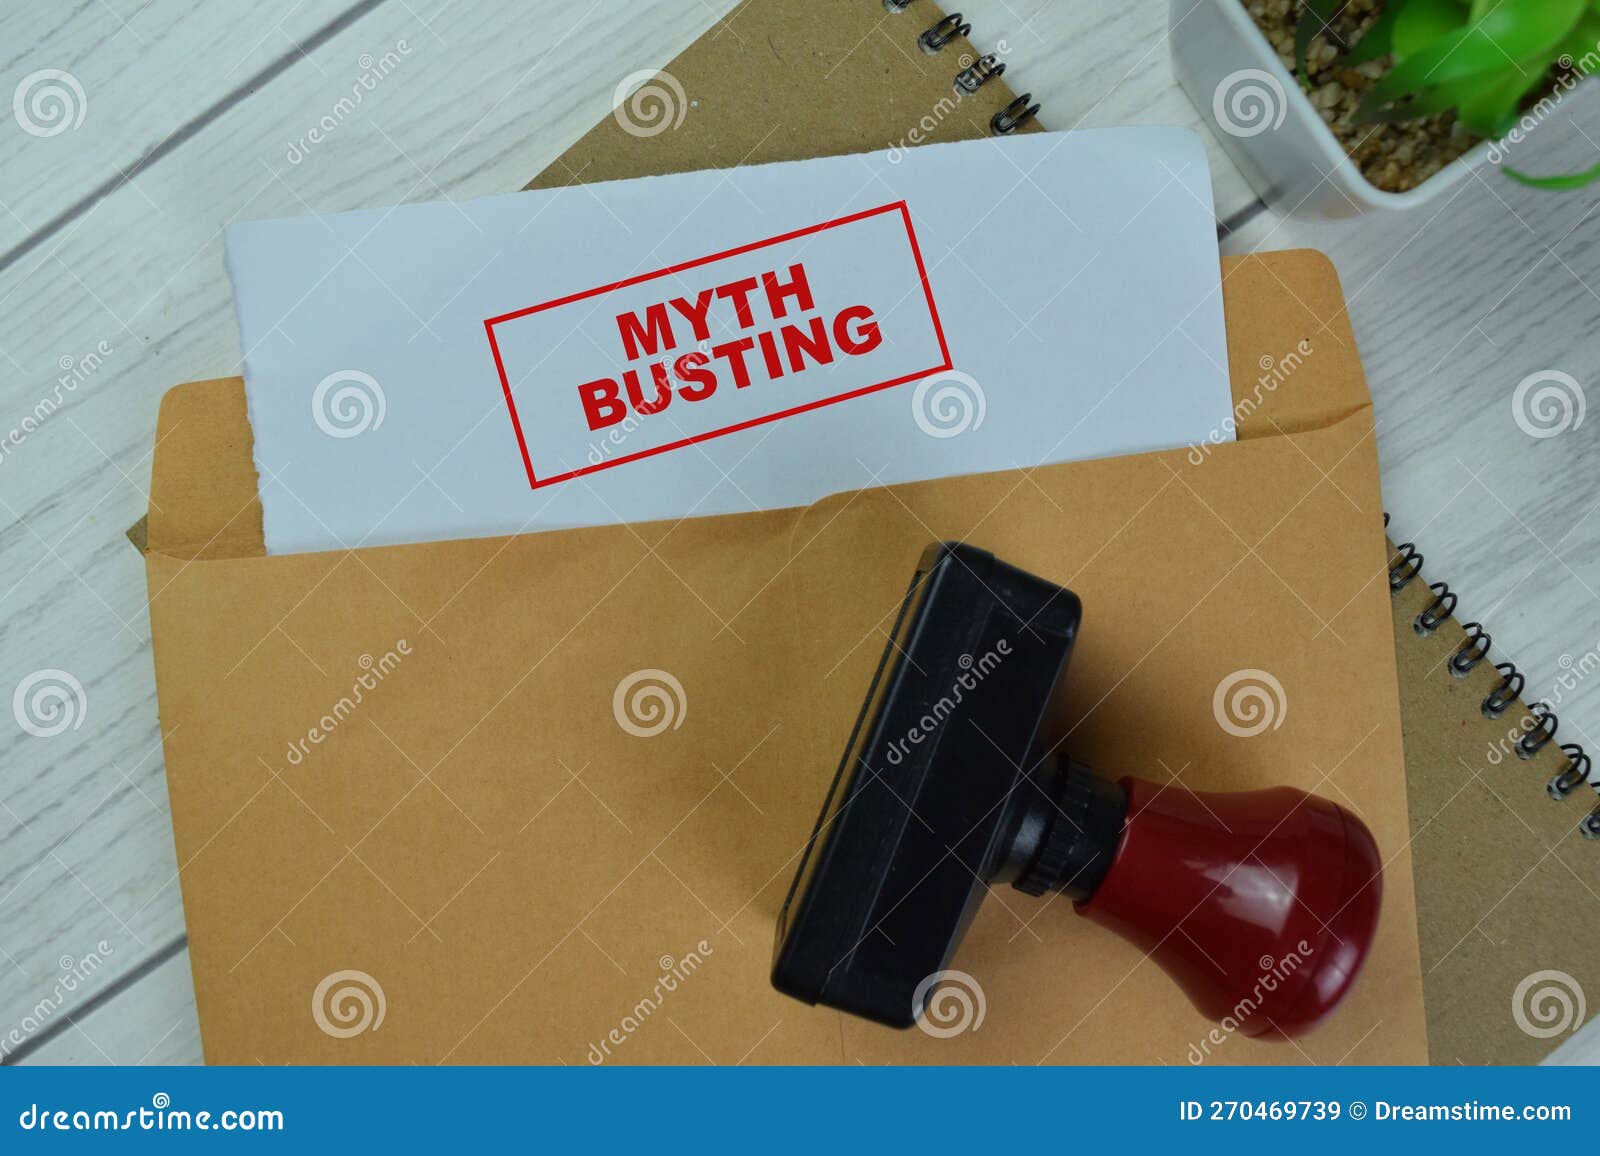 concept of red handle rubber stamper and myth busting text above brown envelope  on on wooden table